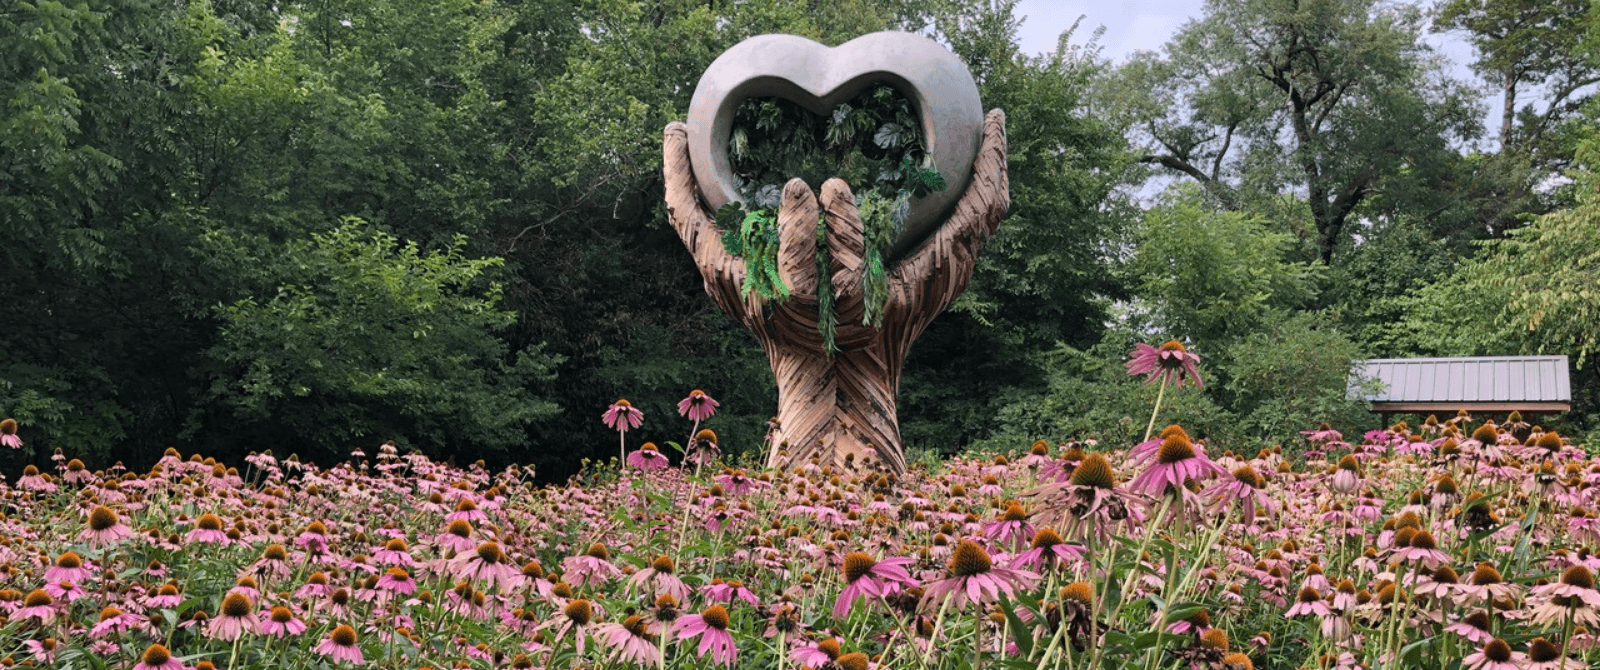 Large hand holding heart sculpture in field of wildflowers